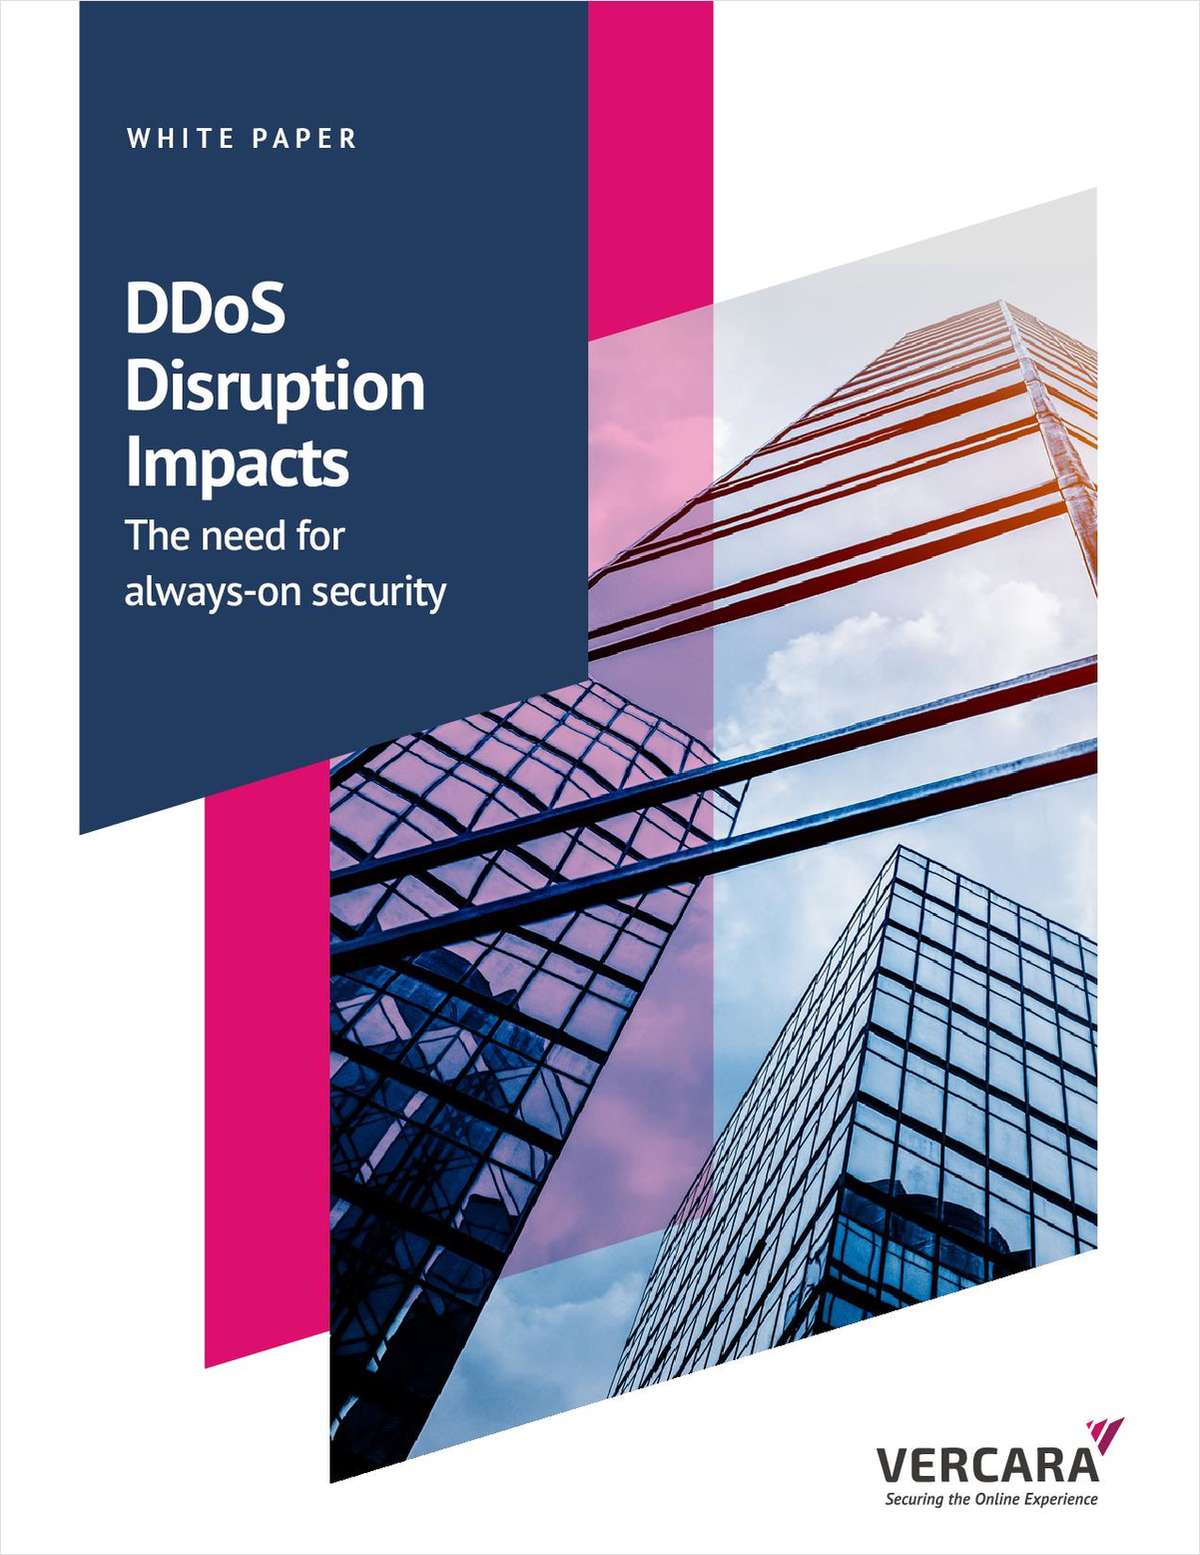 DDoS Disruption Impacts: The Need For Always-On Security